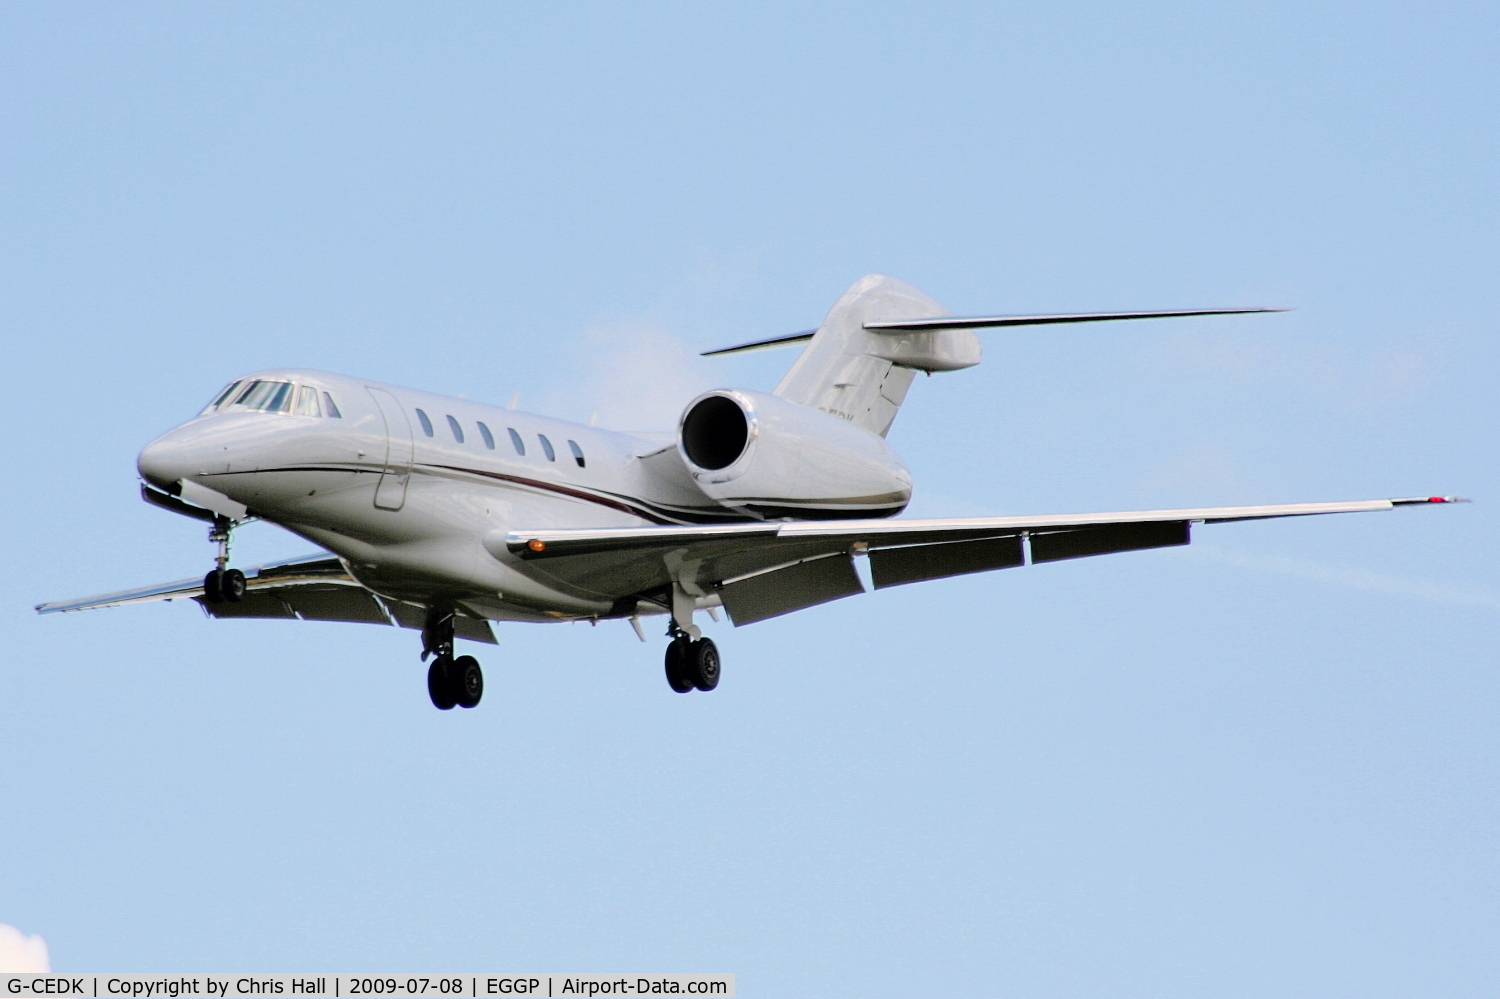 G-CEDK, 2006 Cessna 750 Citation X Citation X C/N 750-0252, owned by the The Duke of Westminster